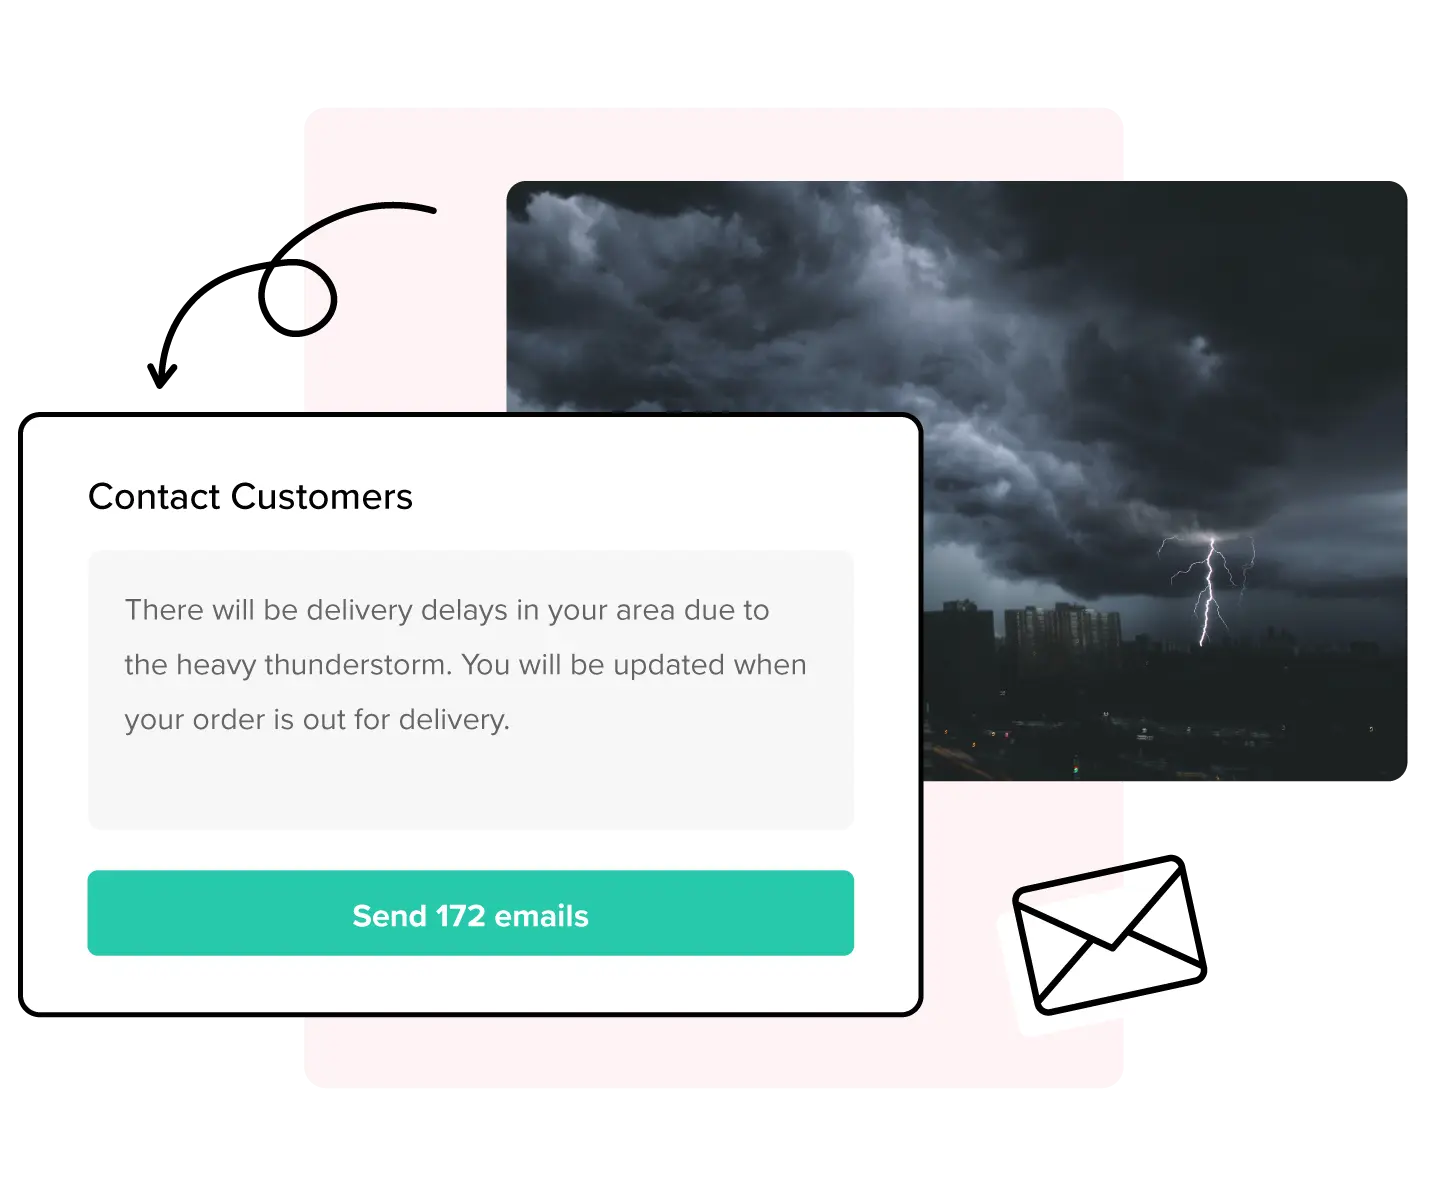 Contact Customers Delay Bad Weather